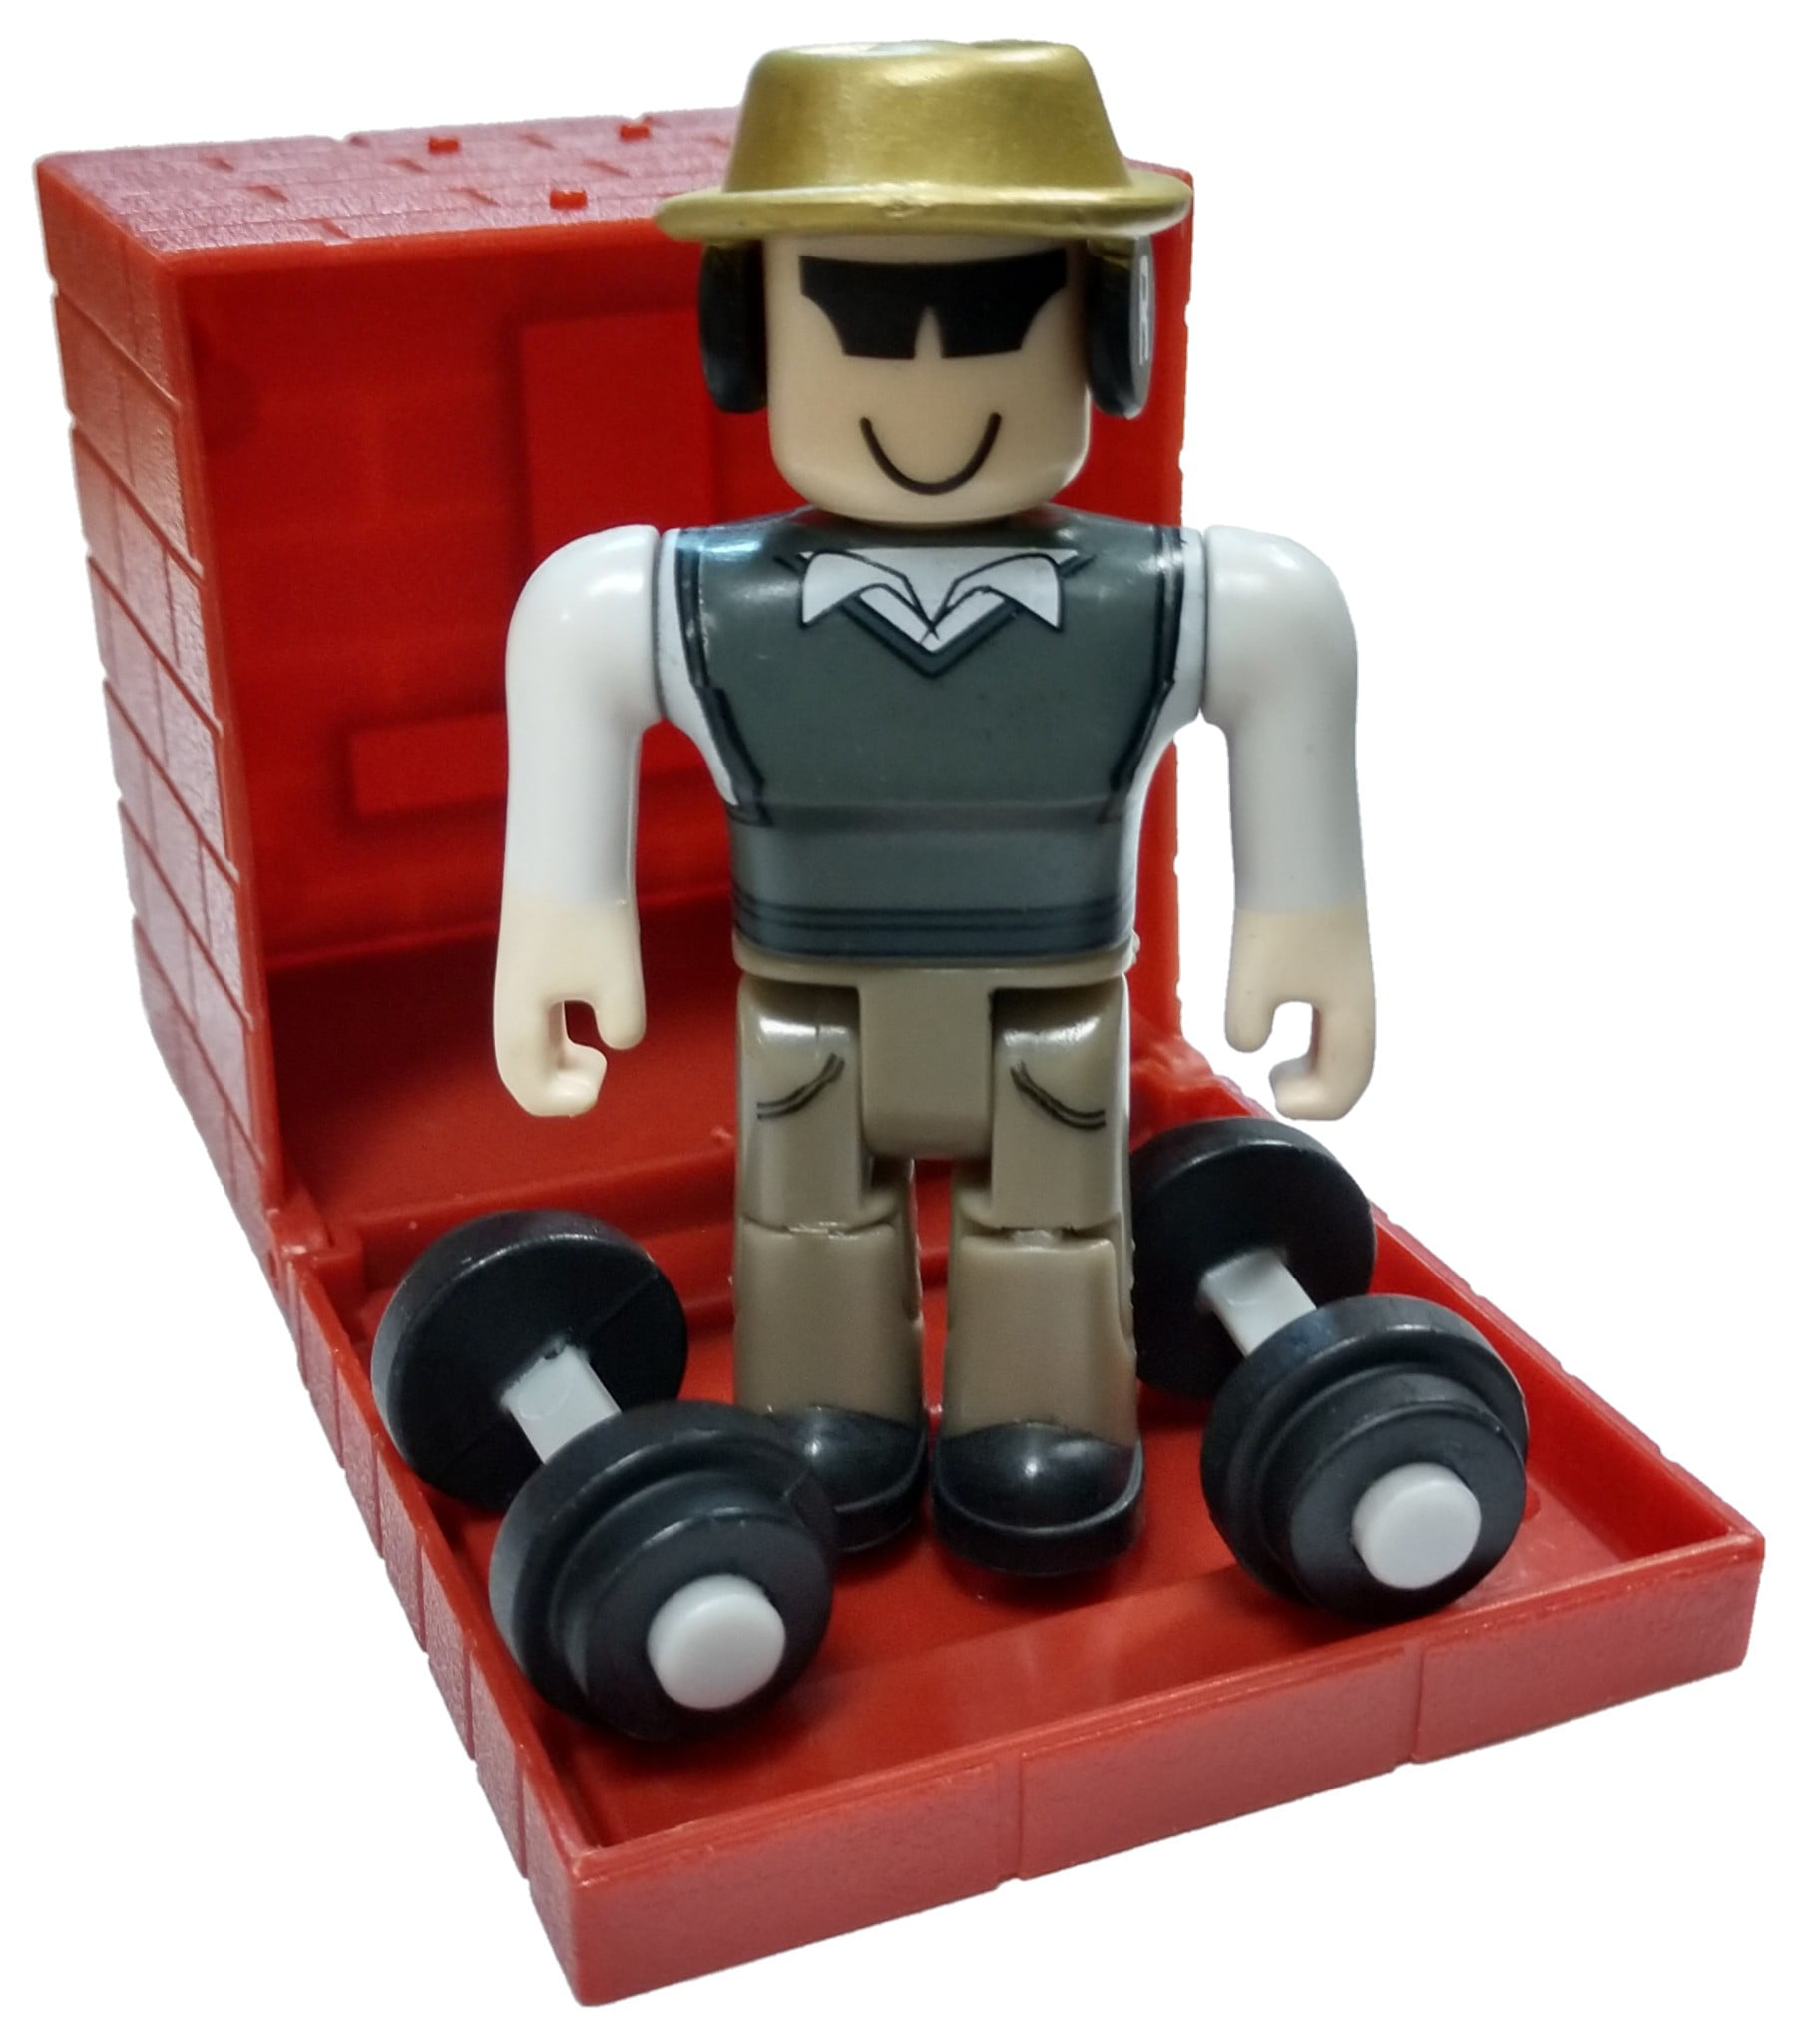 Roblox Red Series 4 Badcc Mini Figure With Red Cube And Online Code No Packaging Walmart Com Walmart Com - roblox red series 4 imaginaerum mini figure with red cube and online code no packaging